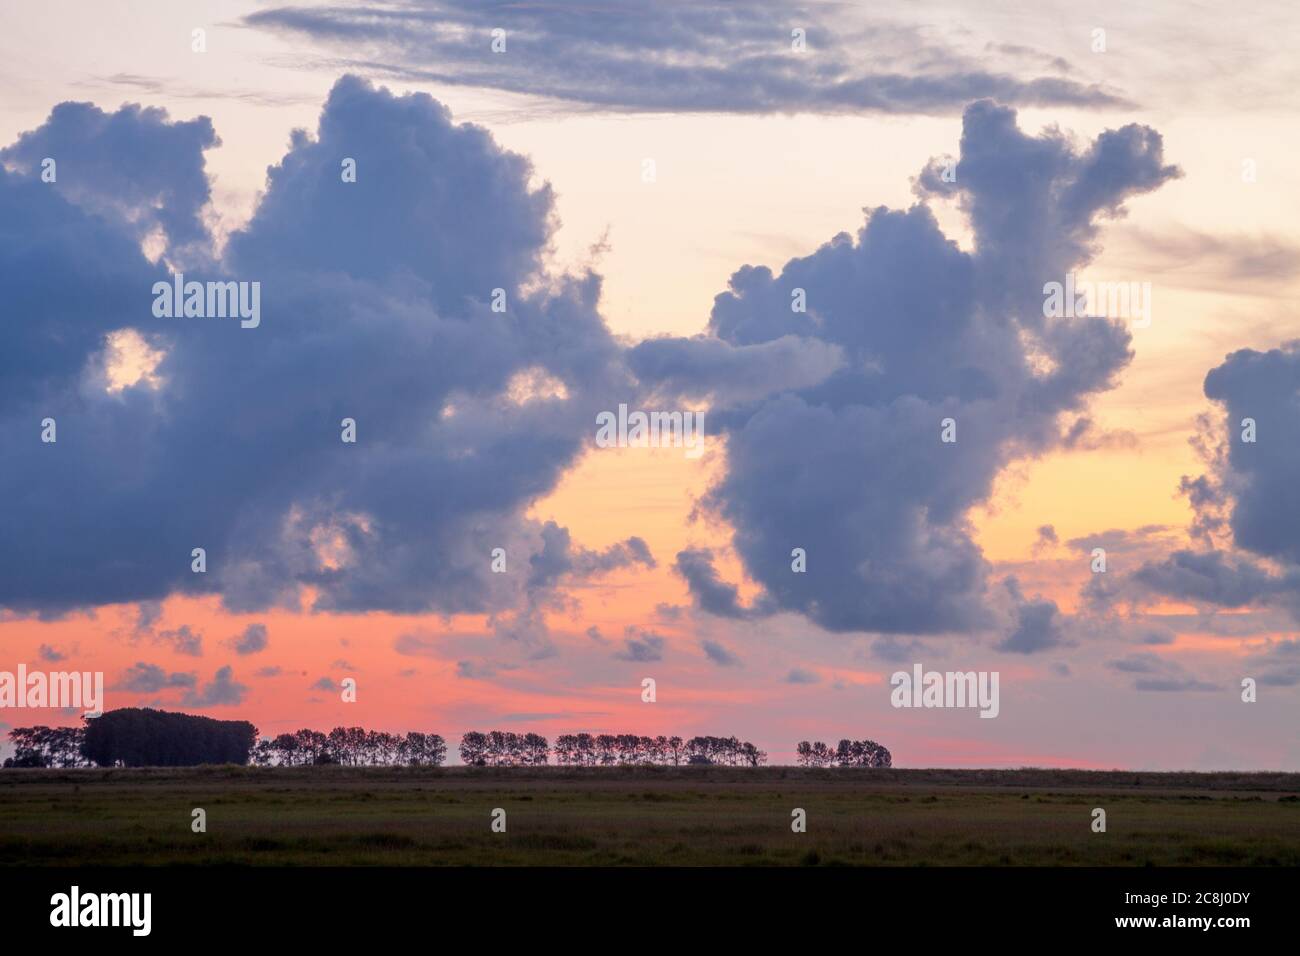 Clouds over a field in Normandy, France at dusk Stock Photo